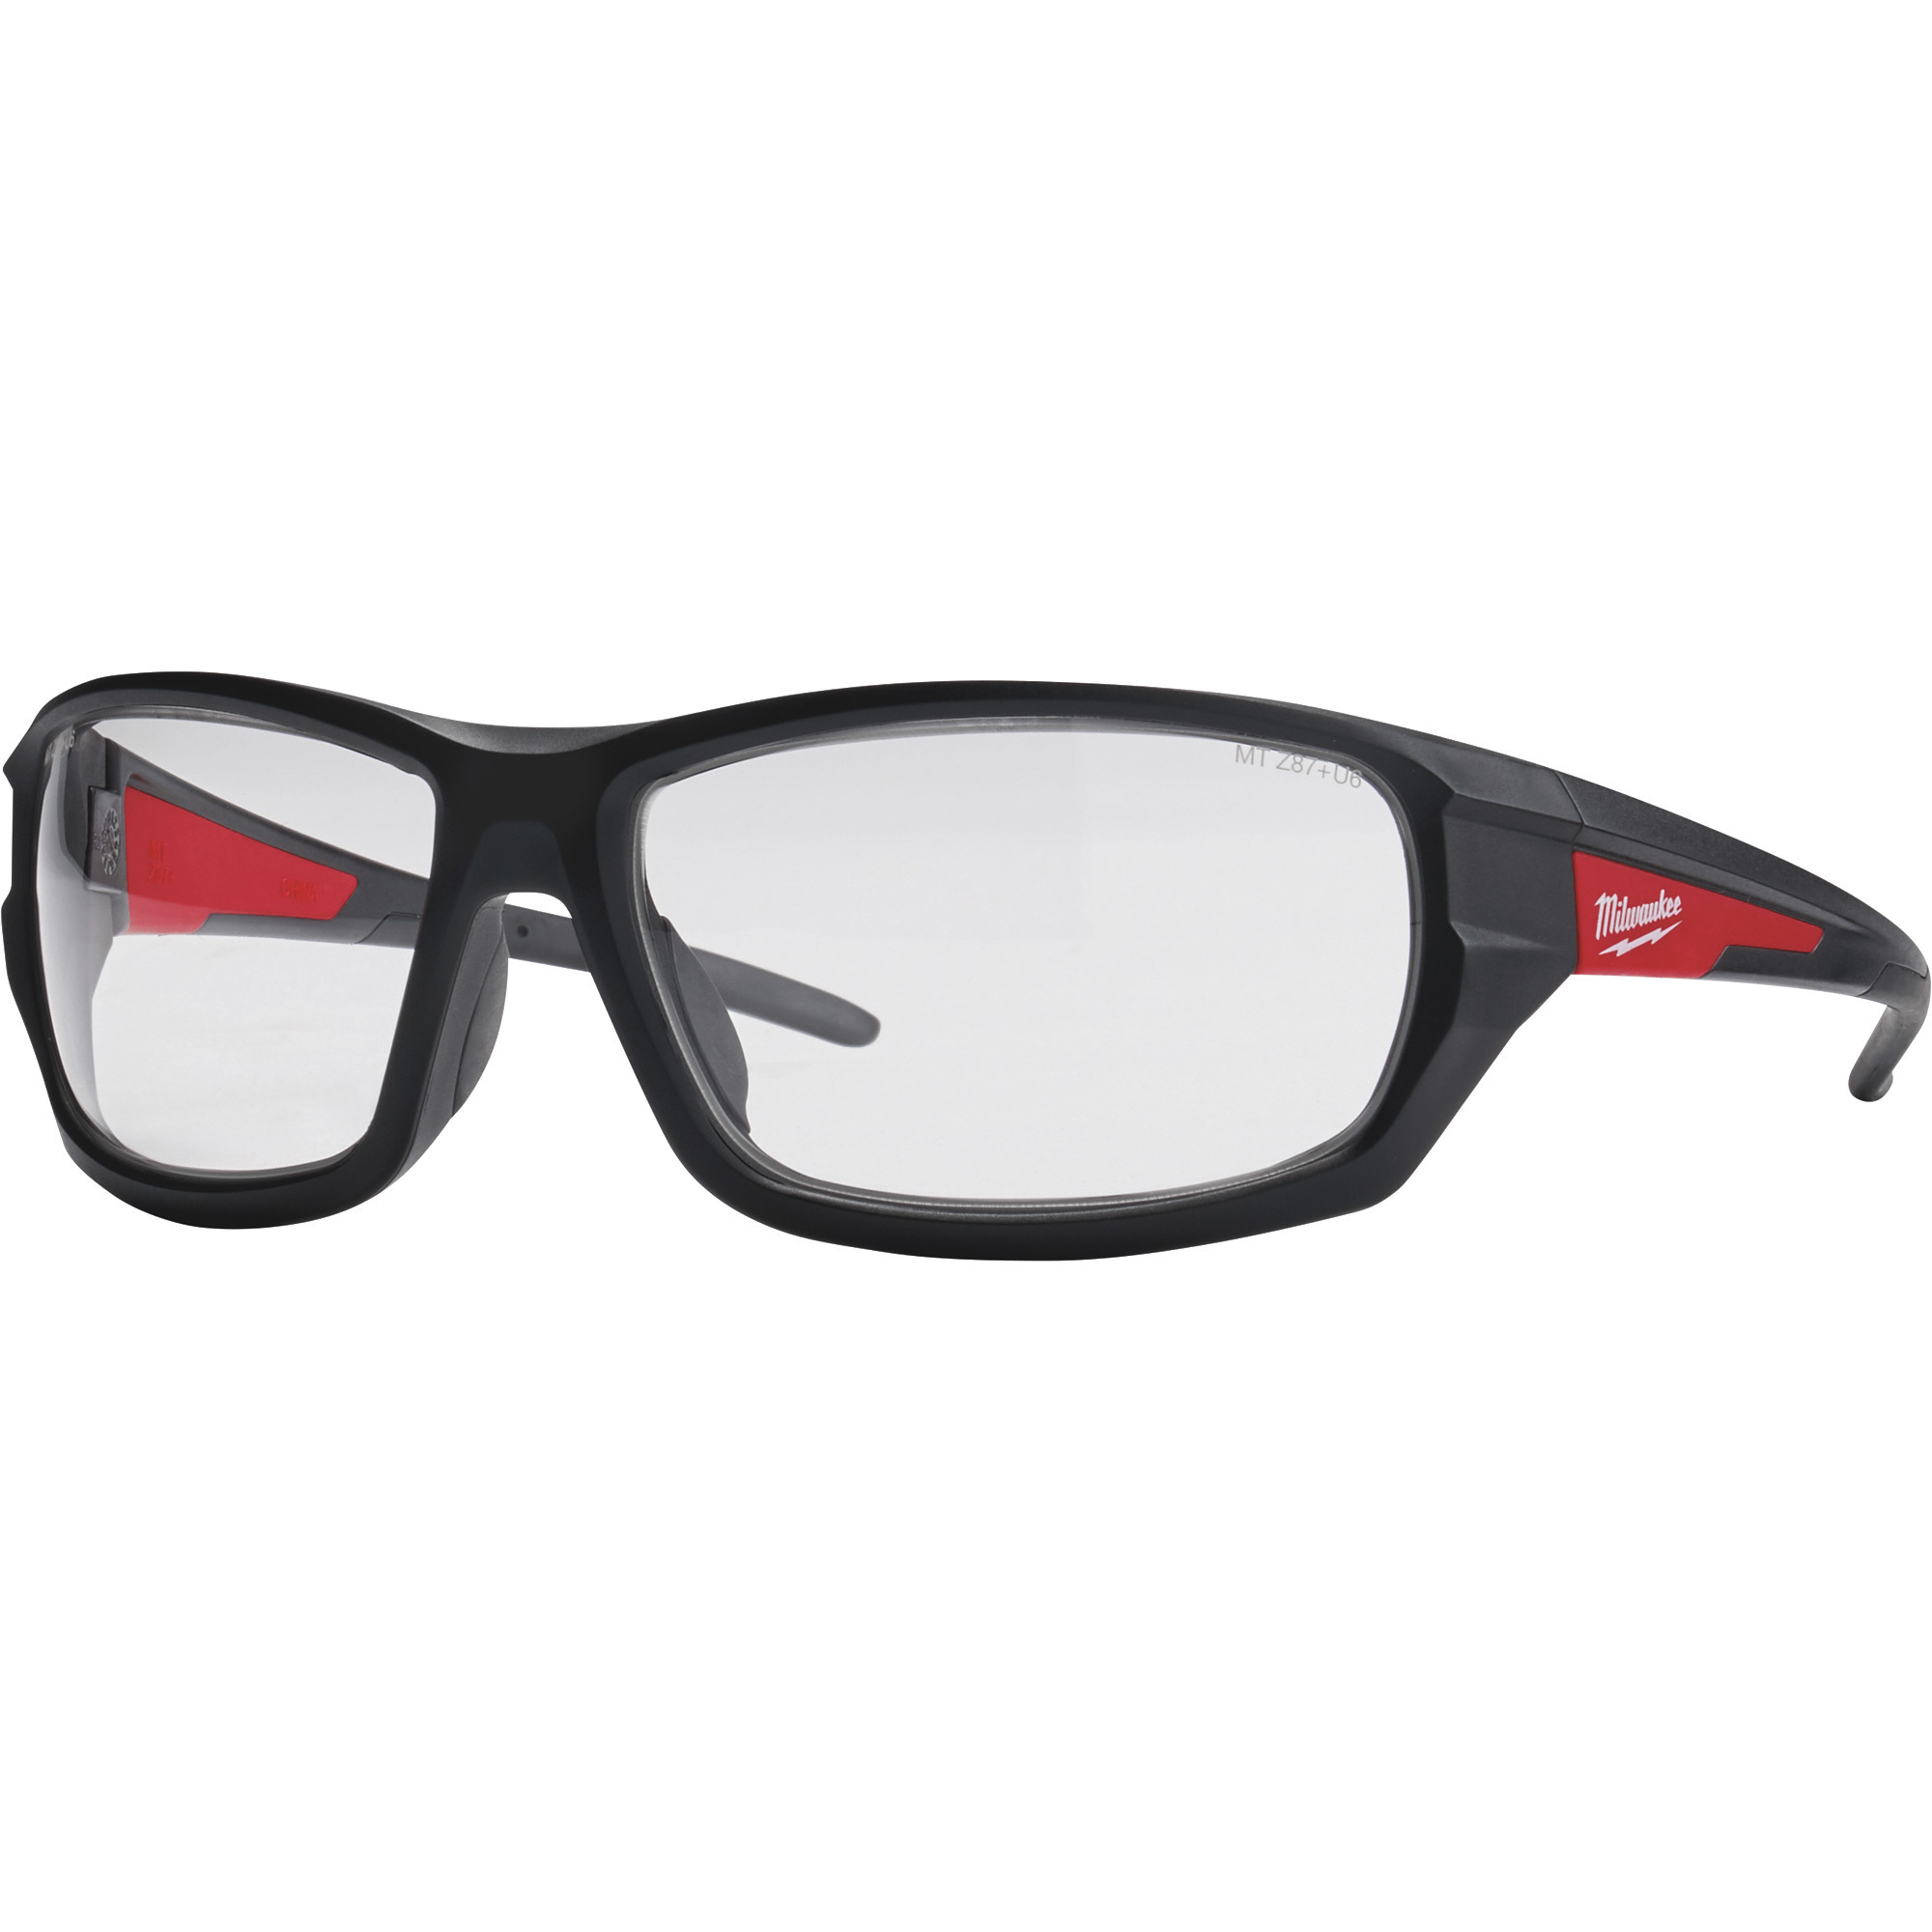 Milwaukee Indoor/Outdoor Safety Glasses with Military Grade Protection, Clear Lenses, Black/Red Frames, Model 48-73-2020